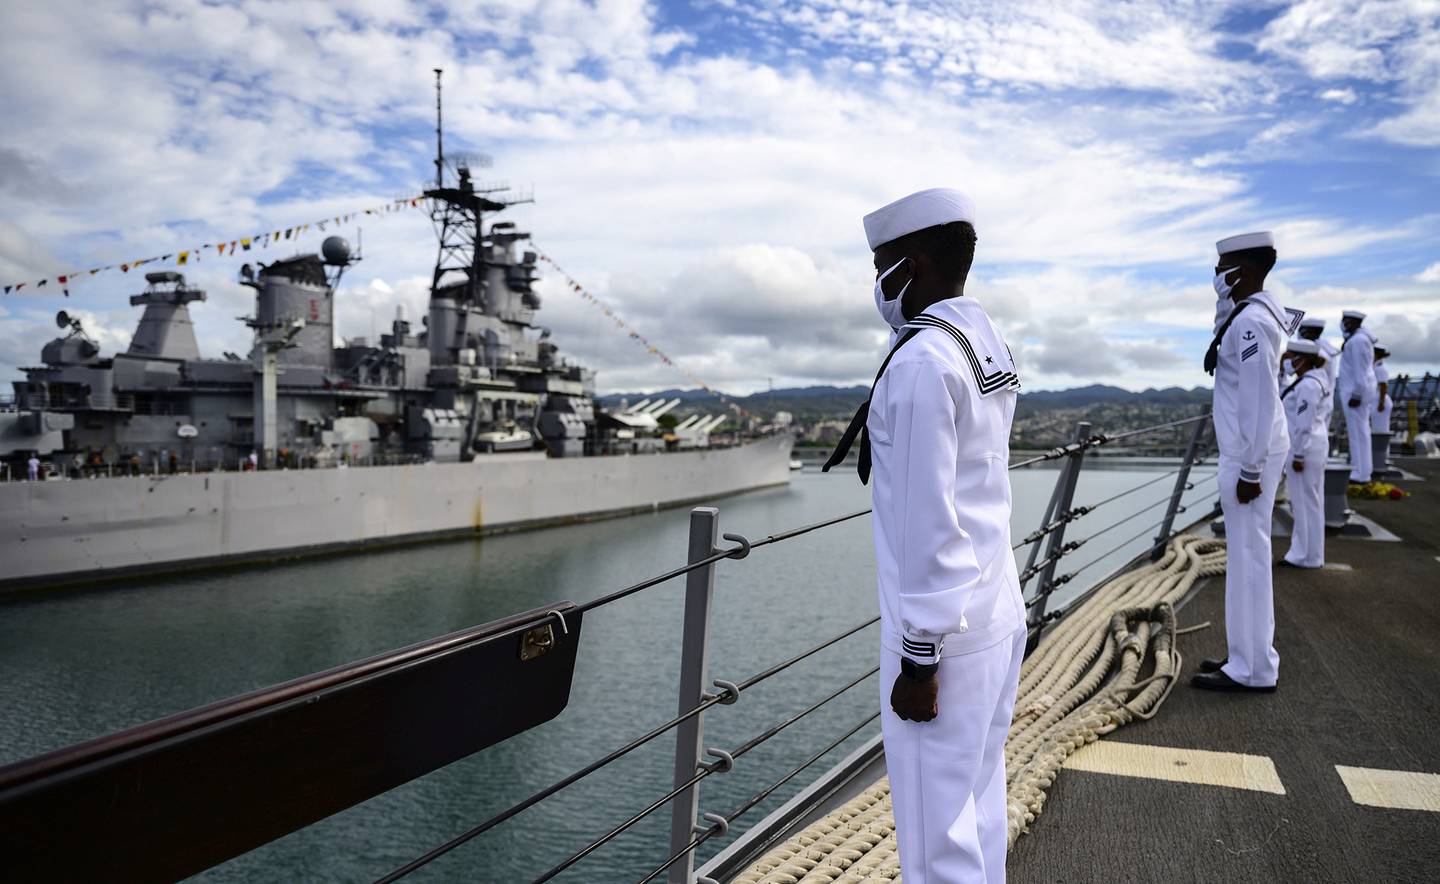 Sailors aboard the guided-missile destroyer USS Michael Murphy (DDG 112) render honors to Battleship Missouri Memorial during the official ceremony for the 75th anniversary of the Japanese surrender that ended World War II, Wednesday, Sept. 2, 2020, in Honolulu.